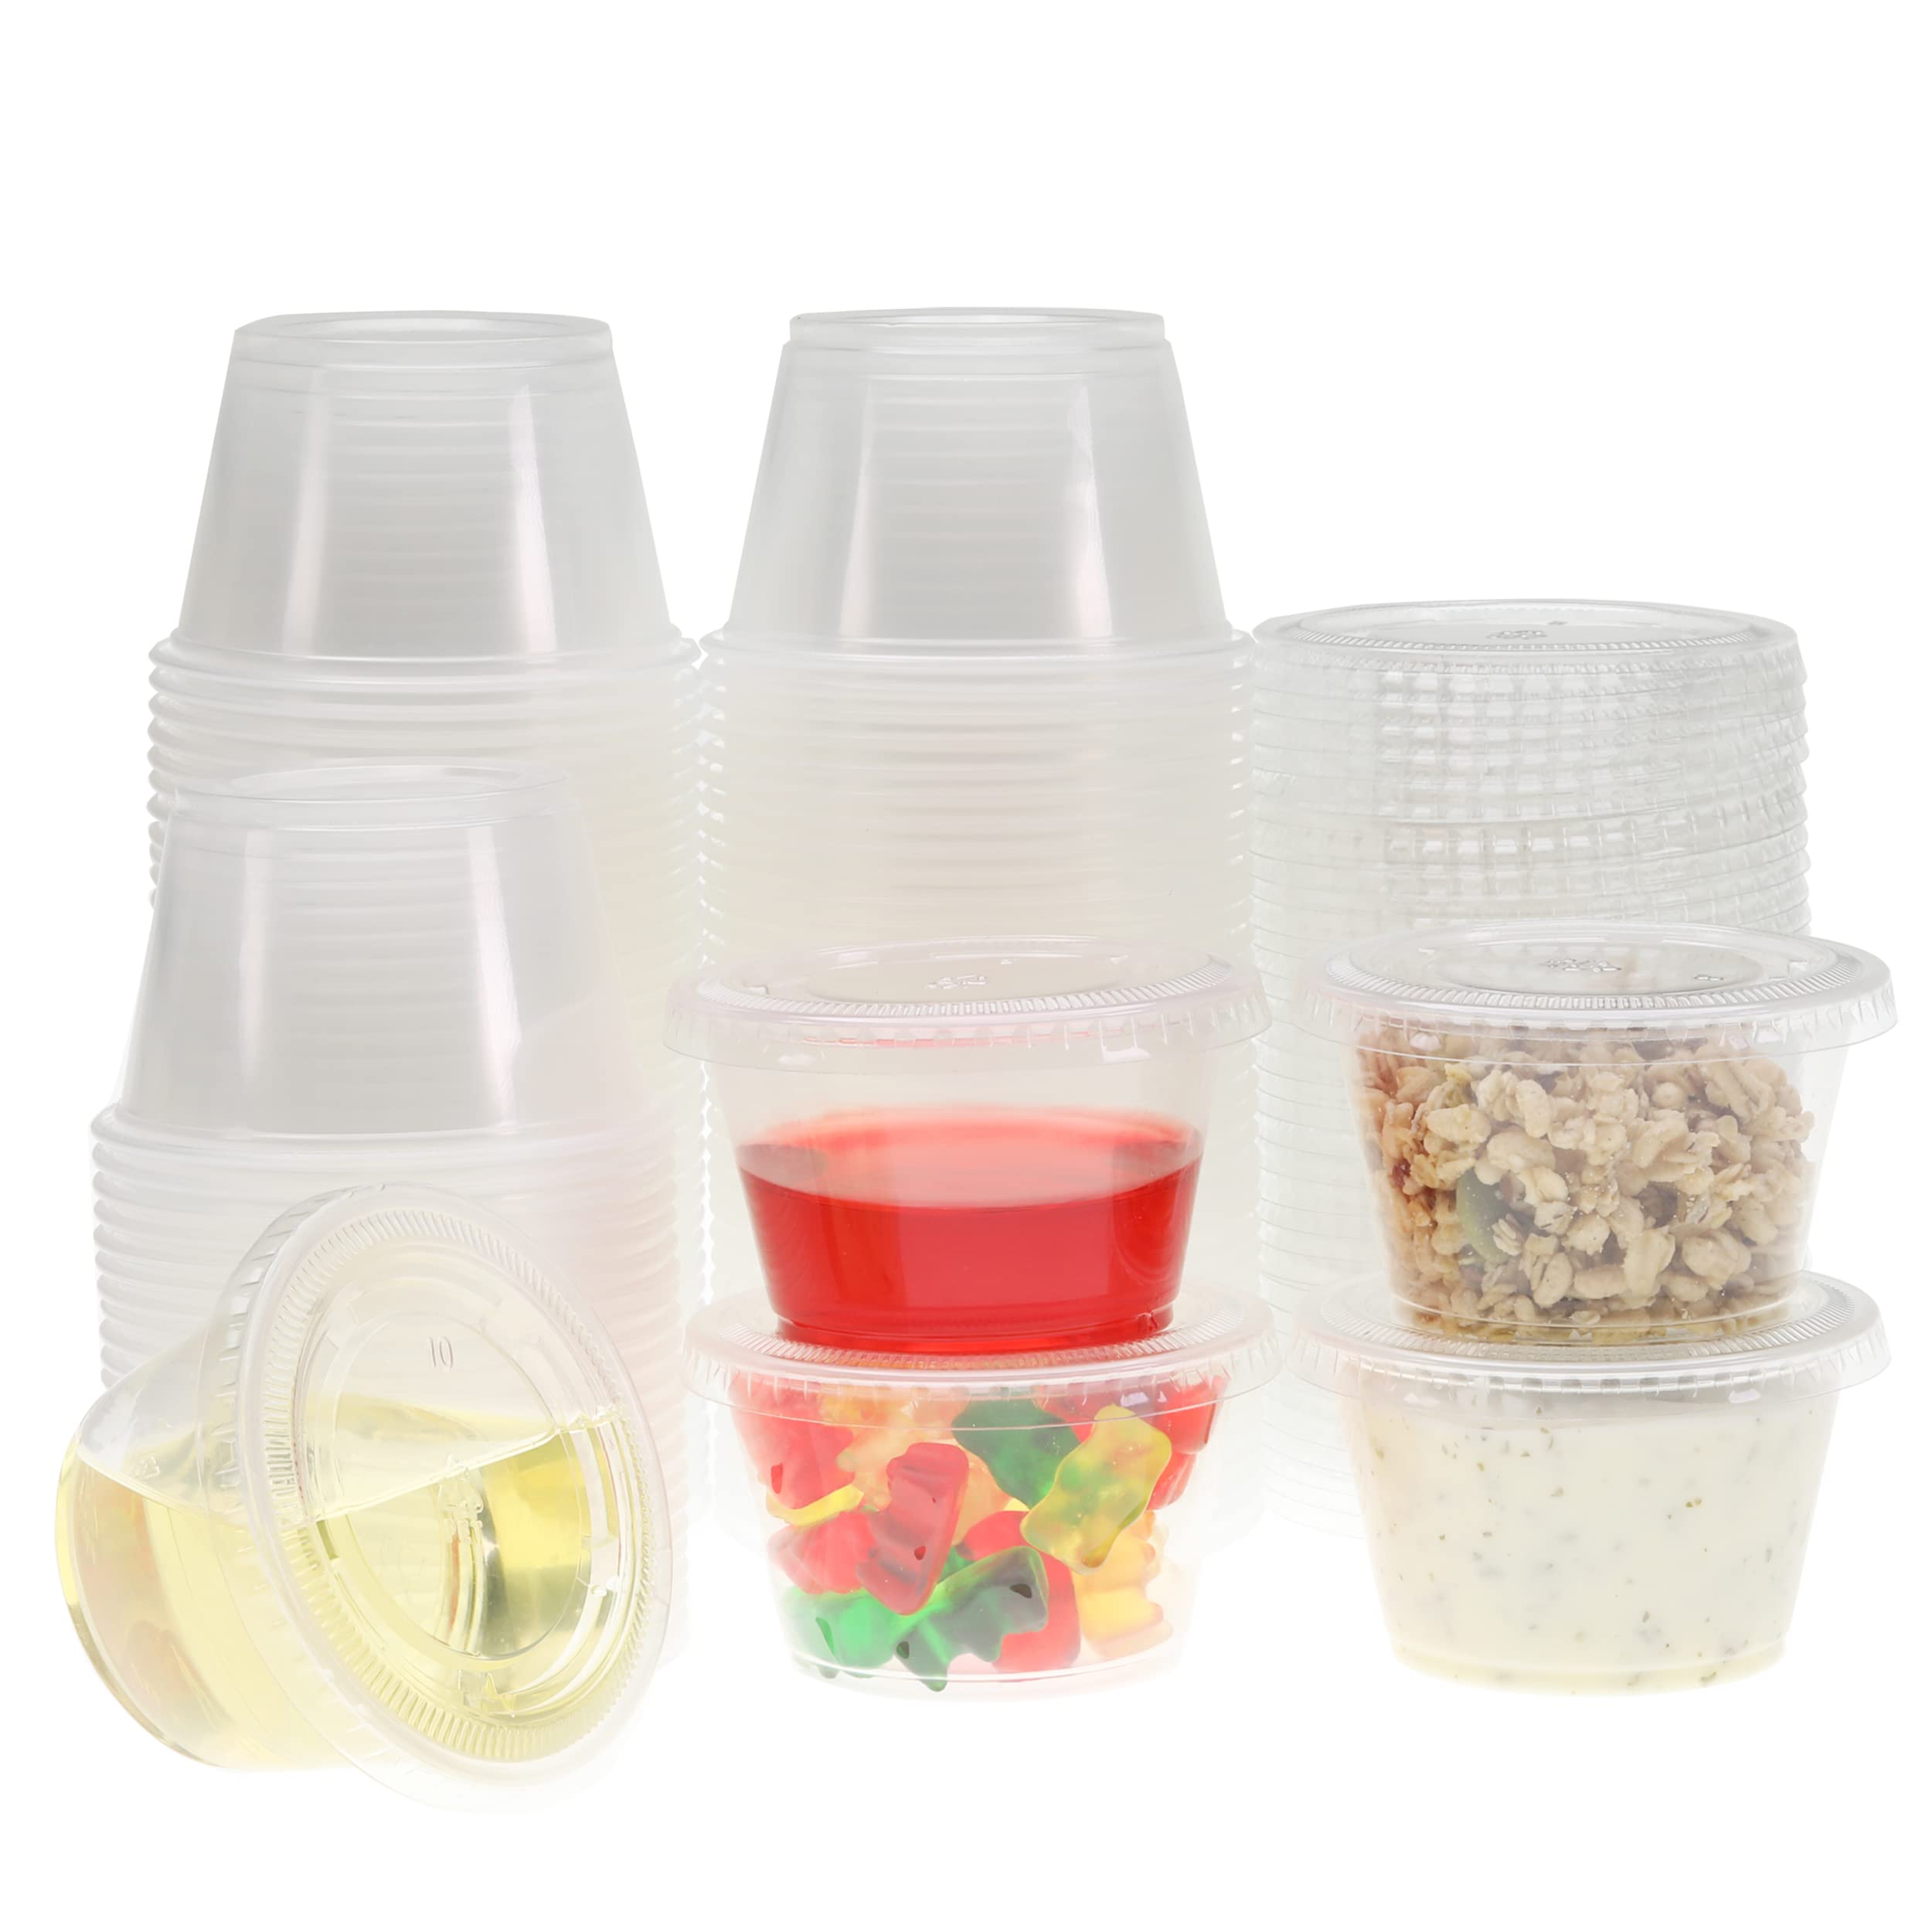 Book Cover Freshware Plastic Portion Cups with Lids [2 Ounce, 200 Sets] Souffle Cups, Jello Shot Cups, Condiment Sauce Containers For Sampling, Sauce, Snack or Dressing